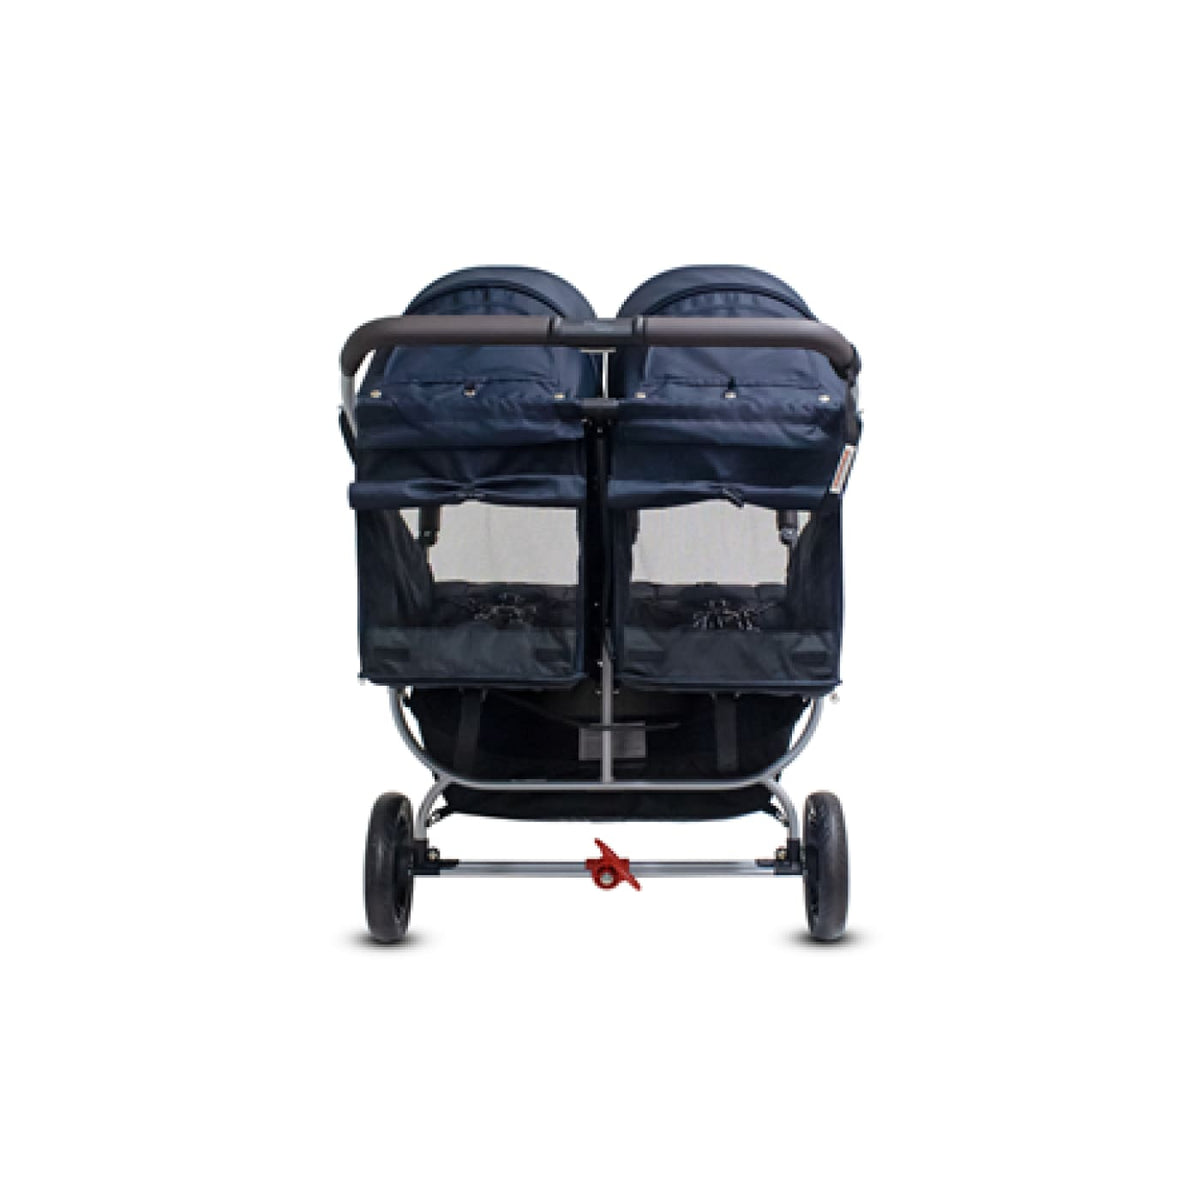 Valco Baby Snap Duo Stroller - Navy - Navy - PRAMS &amp; STROLLERS - TWIN/TANDEM TSC